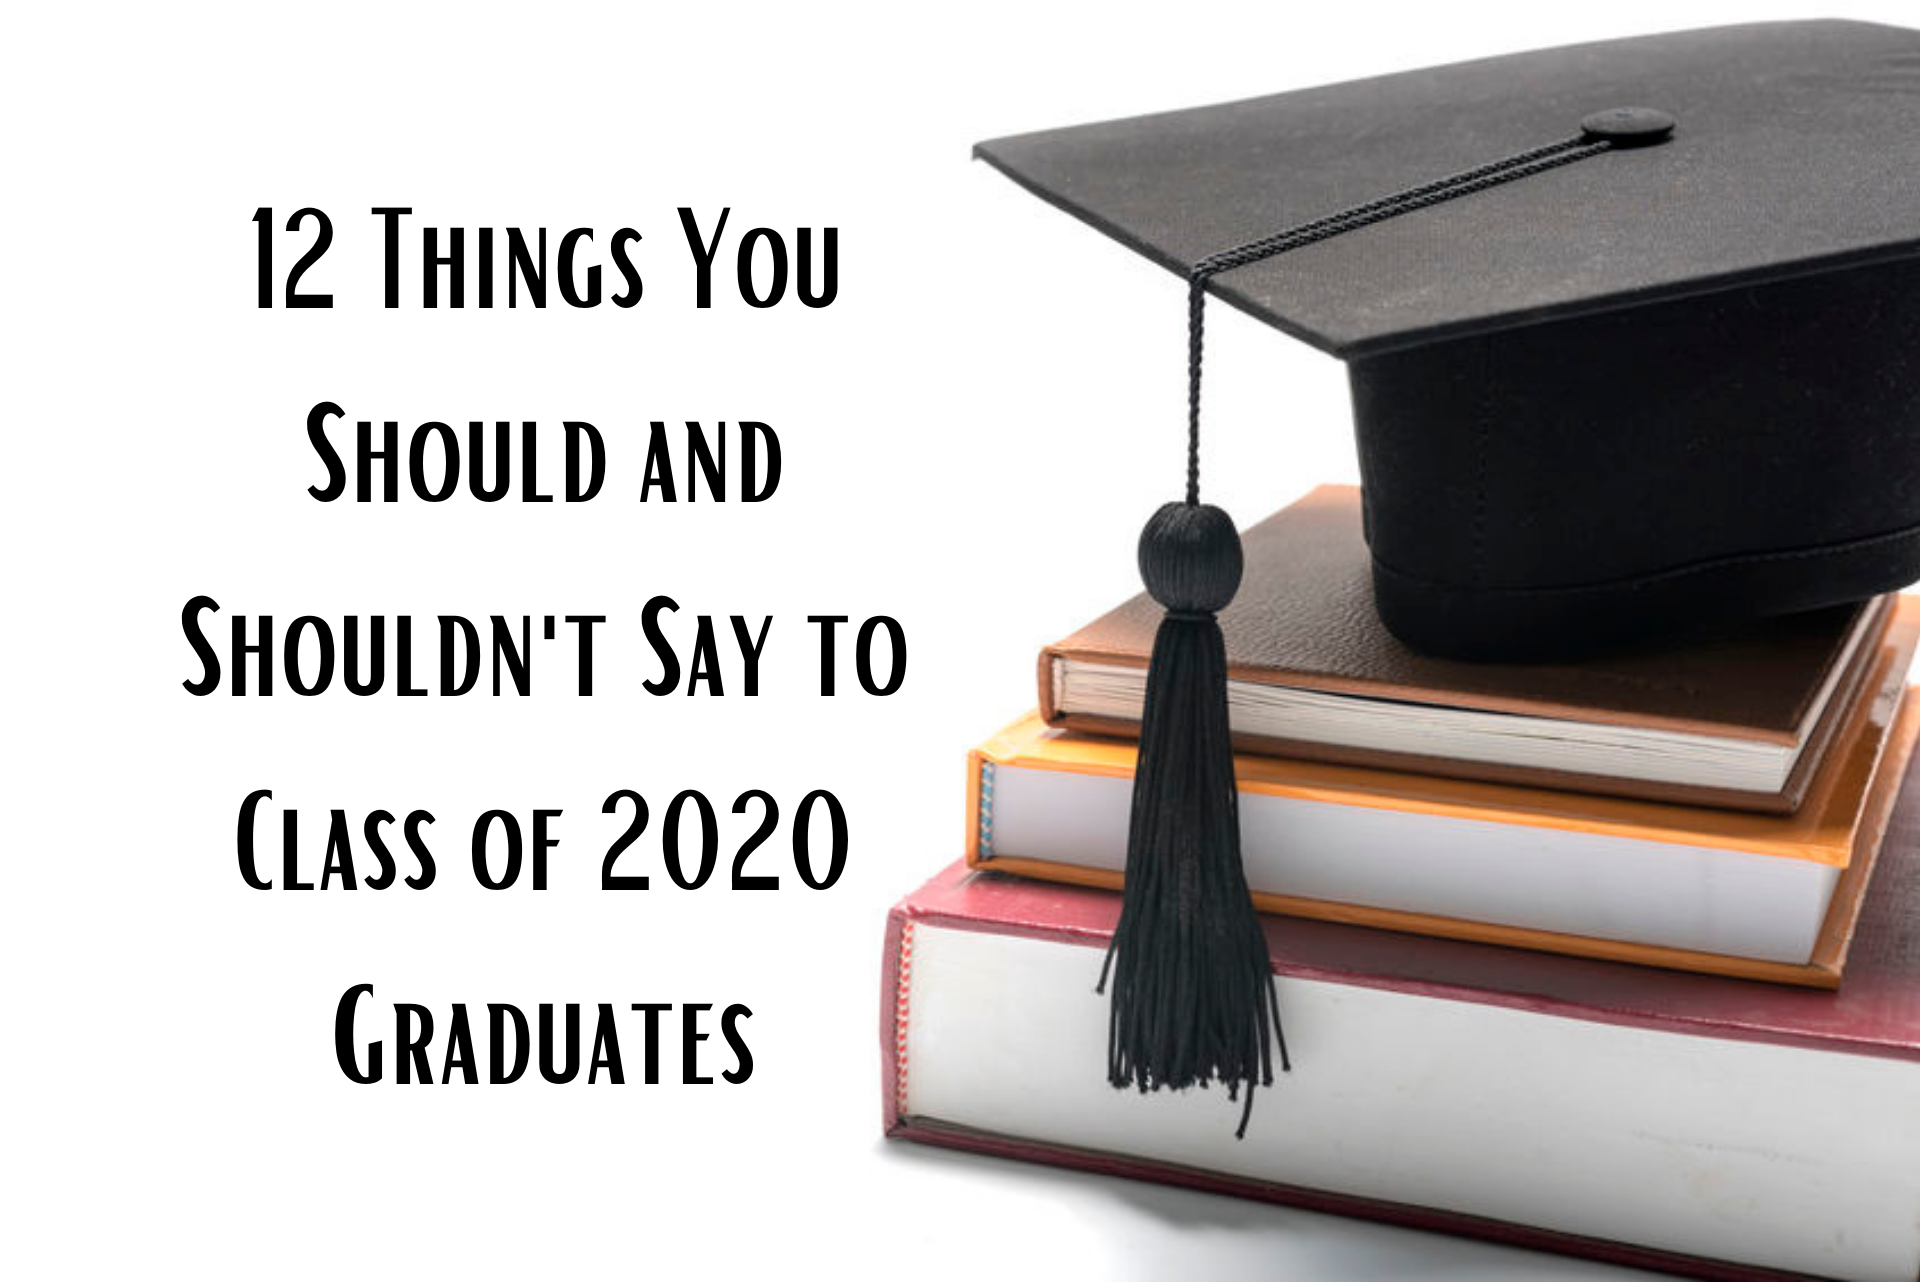 12 Things You Should and Shouldn't Say to Class of 2020 Graduates